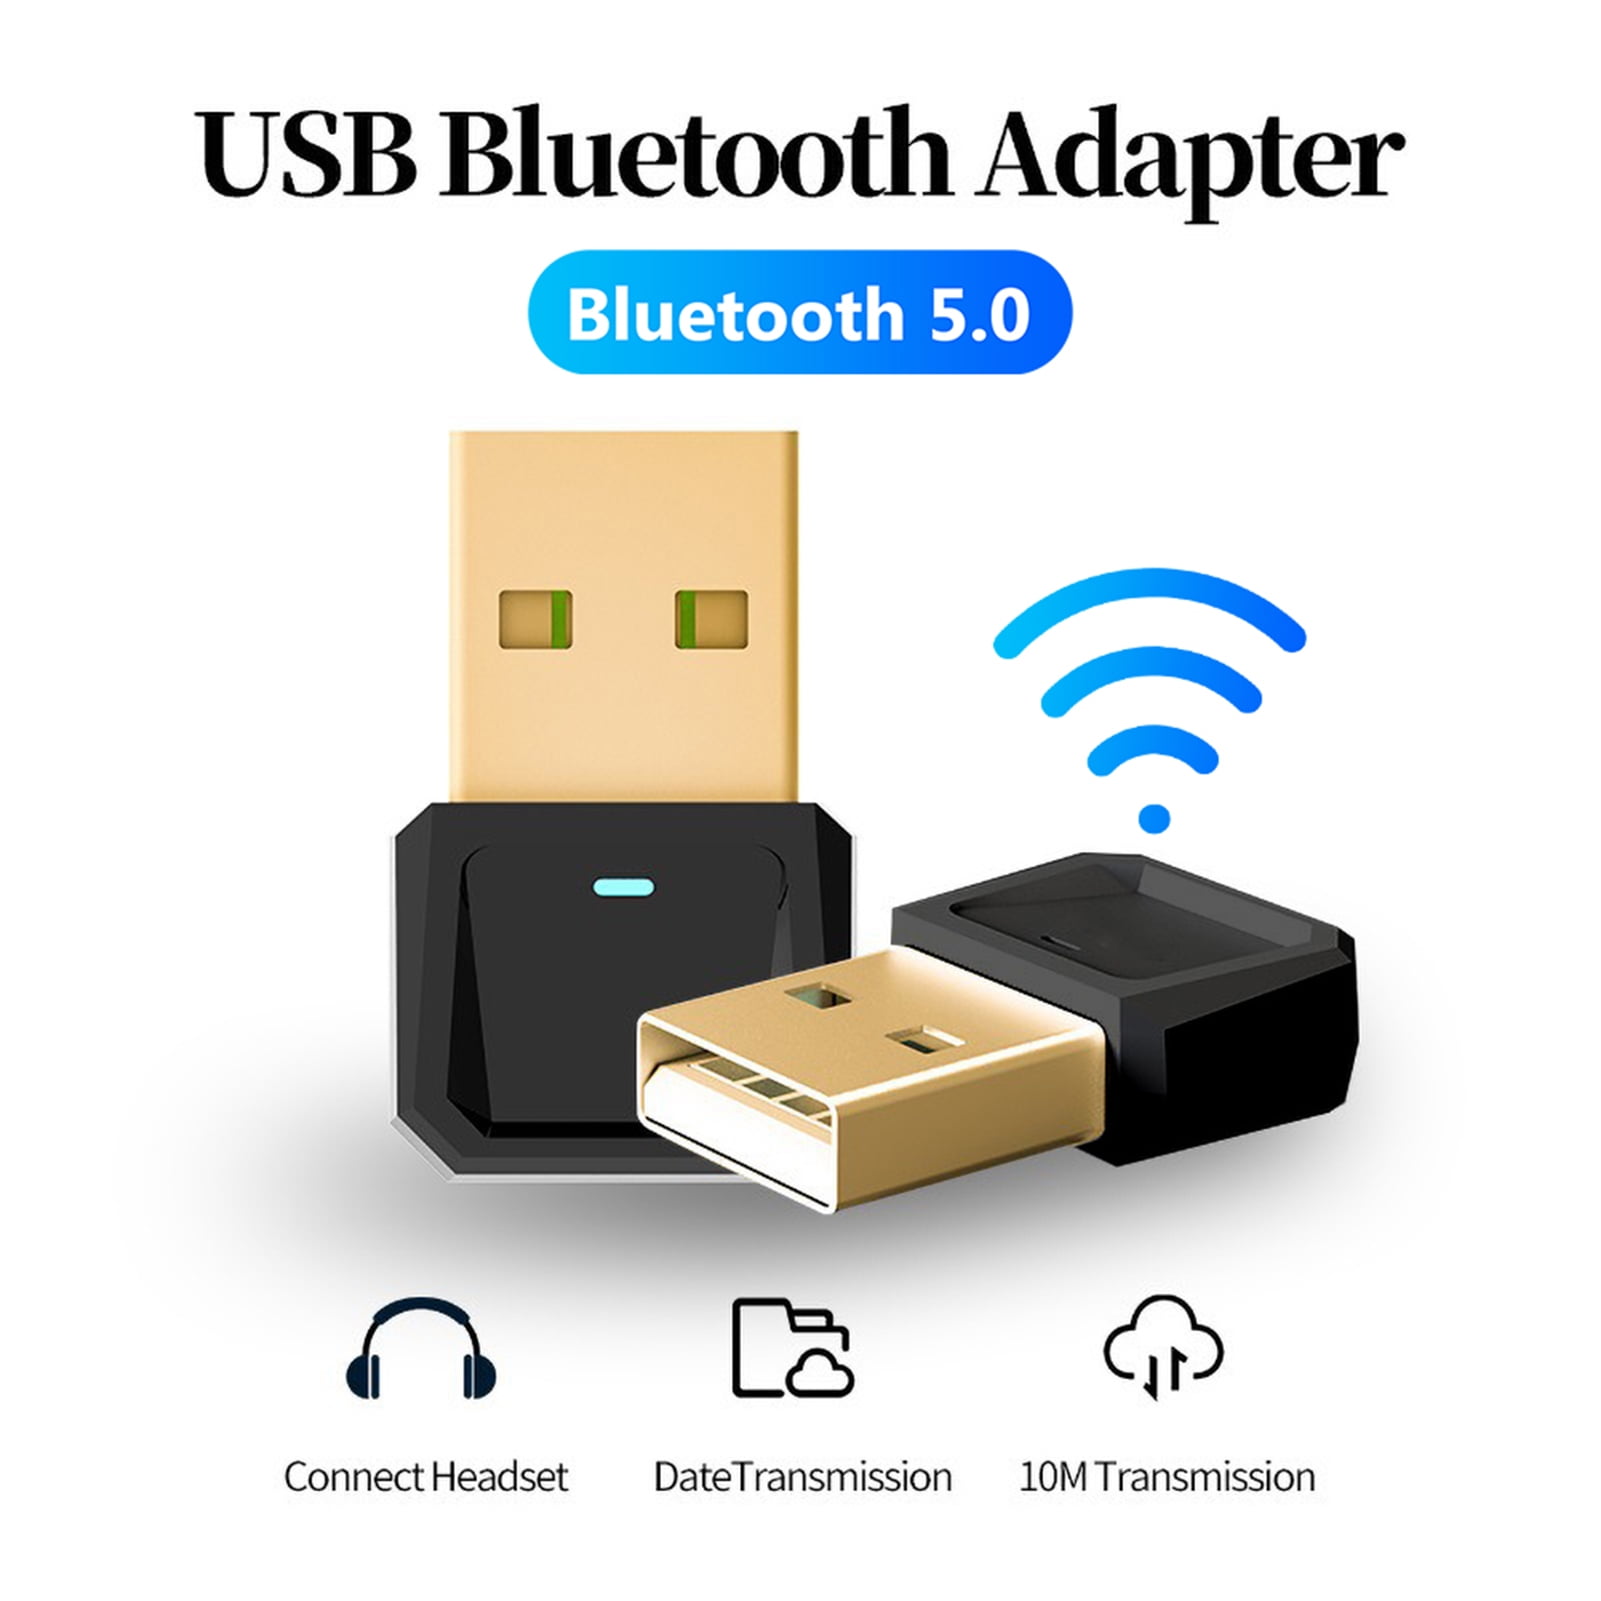 Bluetooth Adapter for PC EKSEN USB Bluetooth Dongle 4.0 Receiver Wireless Transfer for Stereo Headphones Speaker Plug and Play on Windows 8,10. 